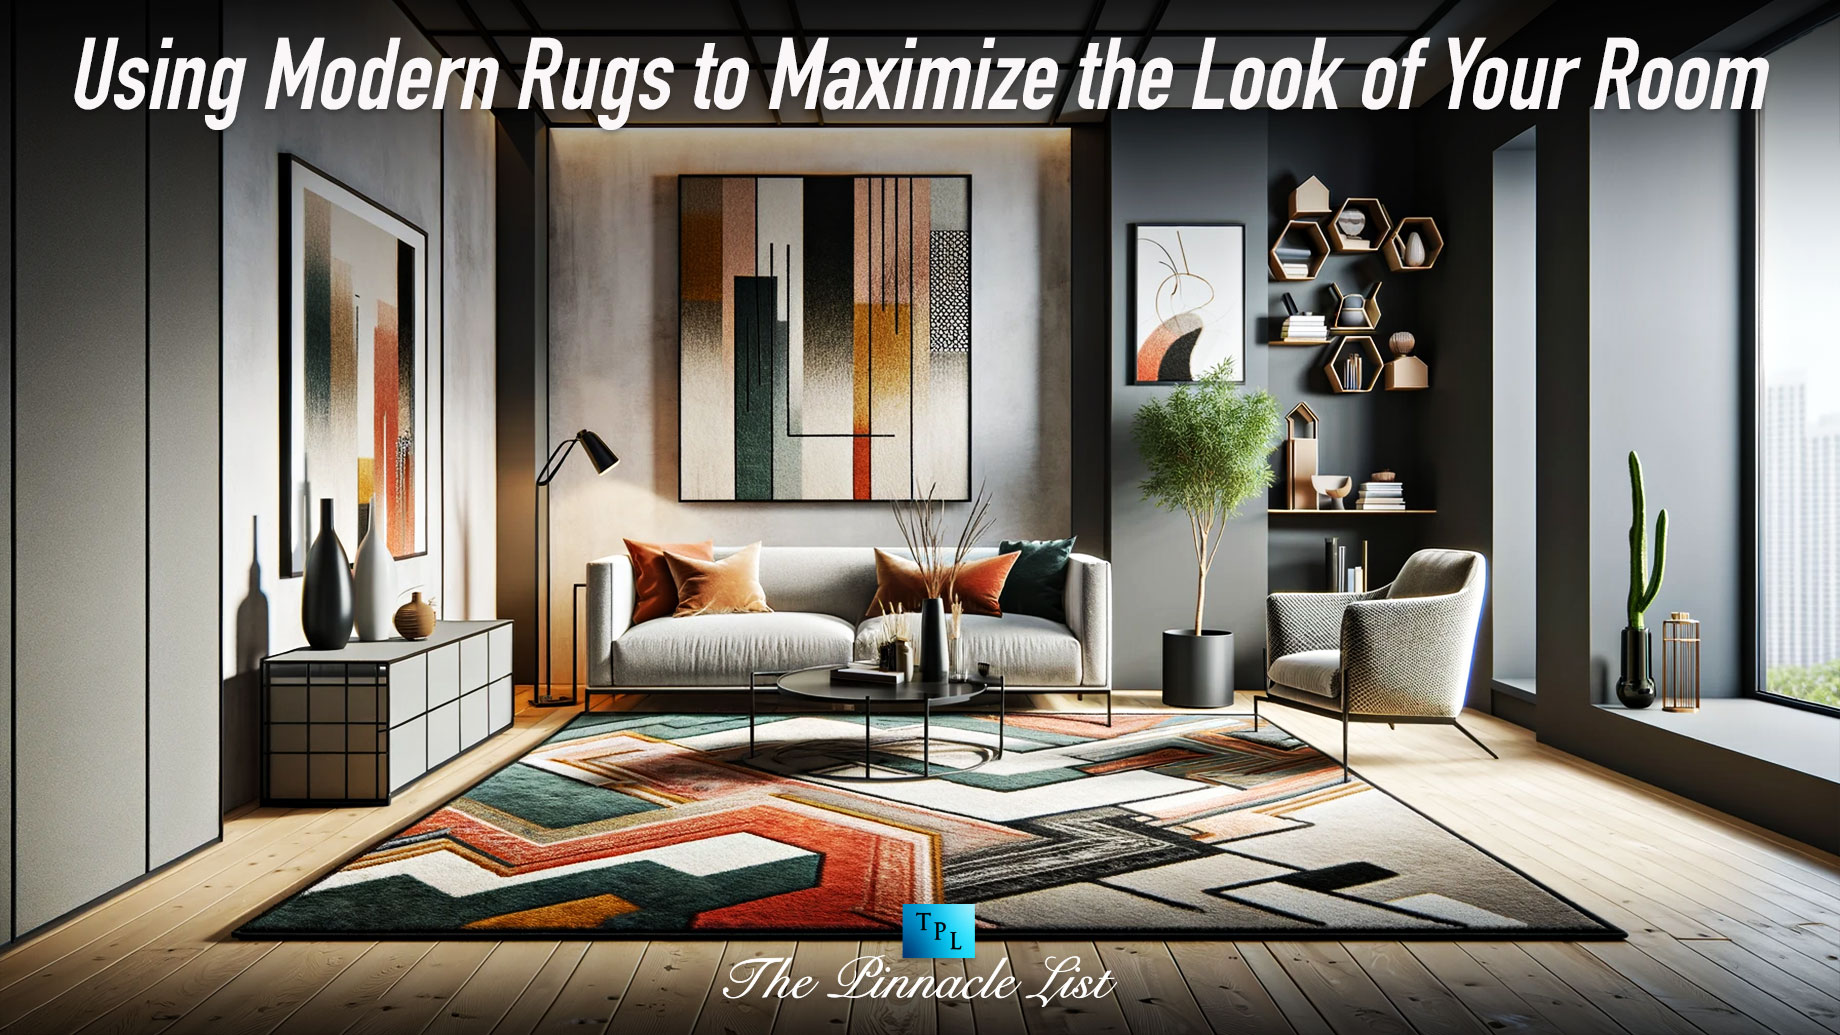 Using Modern Rugs to Maximize the Look of Your Room